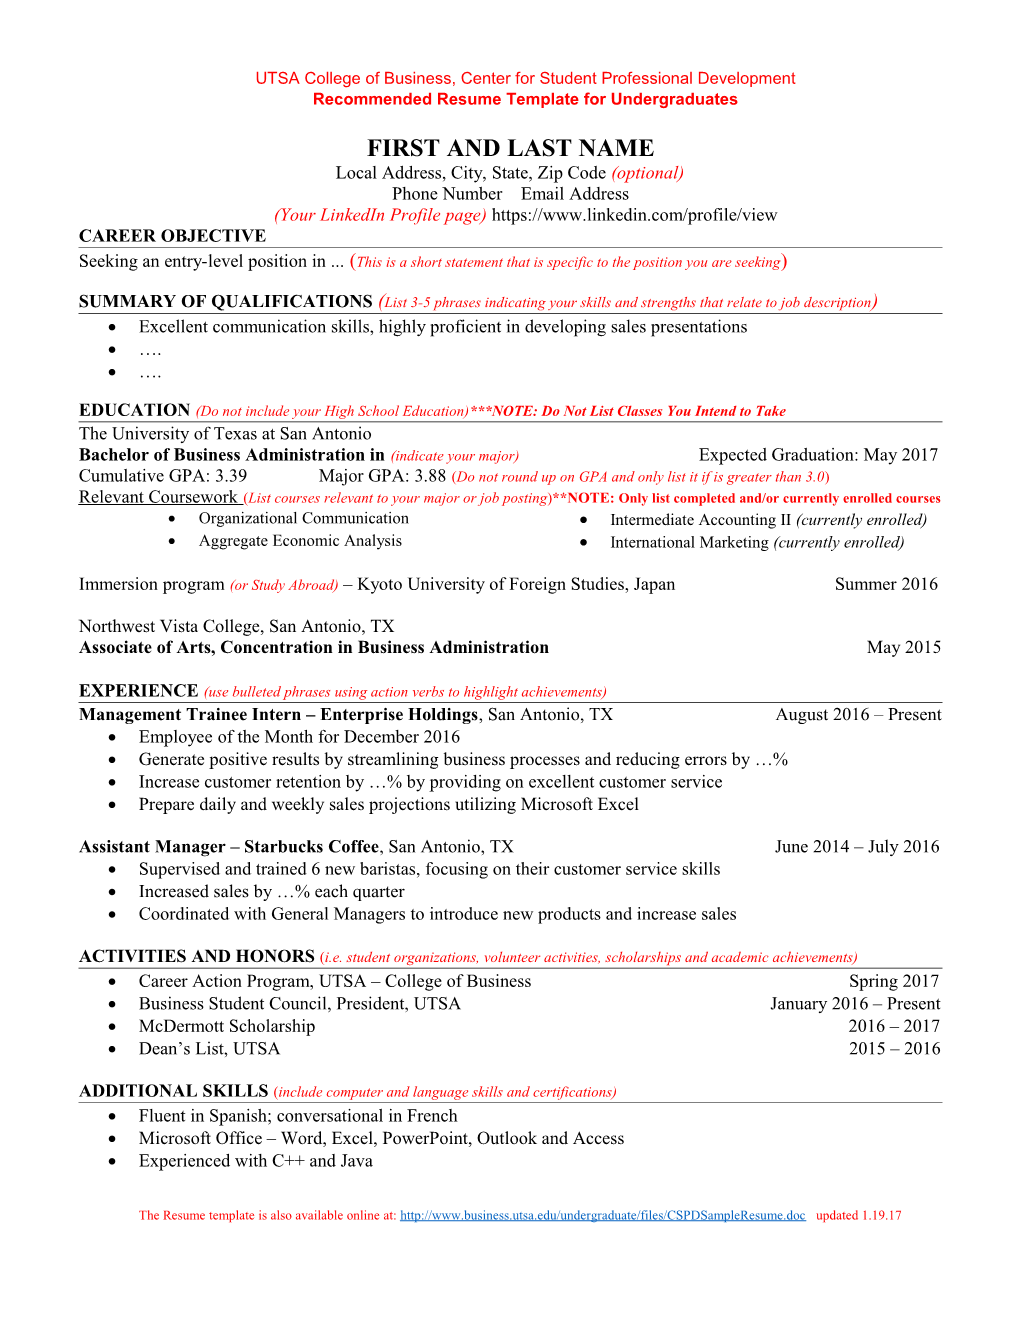 Recommended Resume Template for Undergraduates